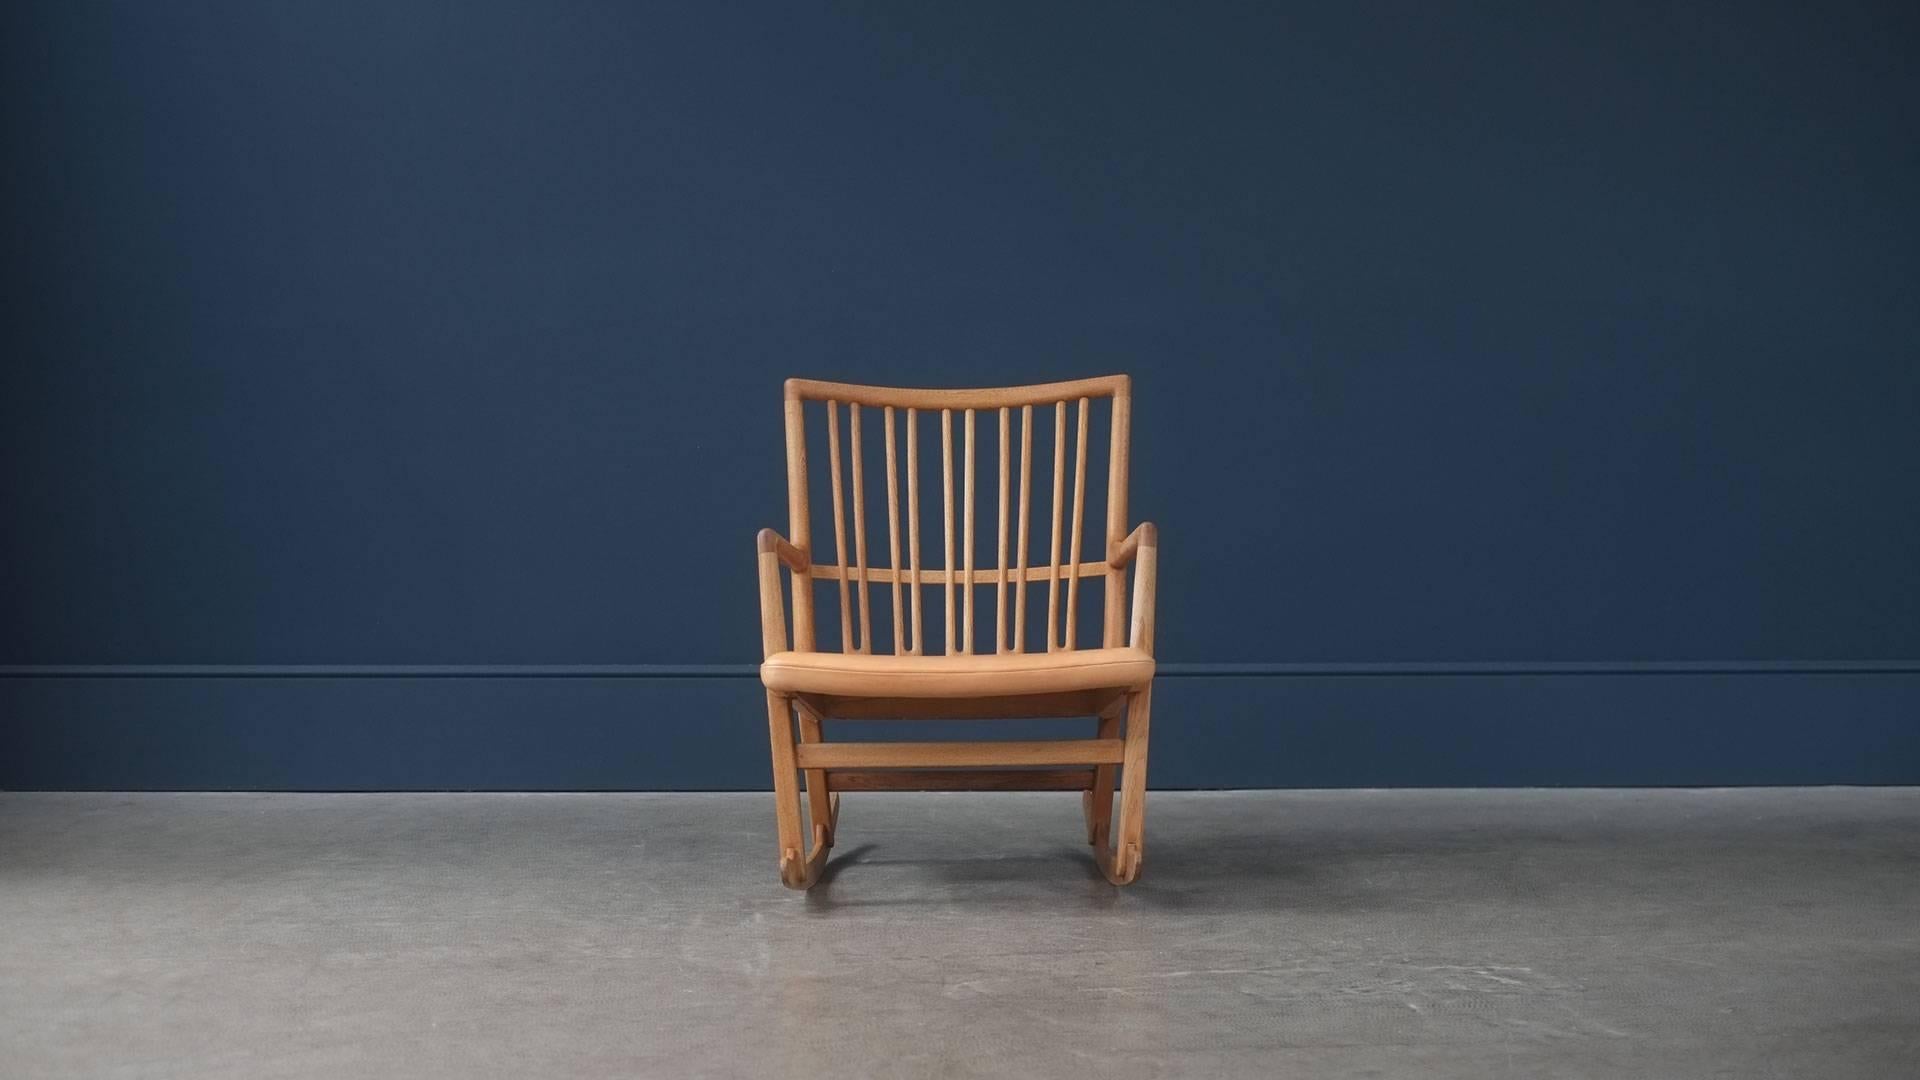 Beautiful rocking chair model ML33 designed by Hans Wegner for Mikael Laursen, Denmark, 1942. Amazing quality solid oak frame with intricate back detail. This example with wonderful natural aniline leather seat with great patina. Seldom seen and